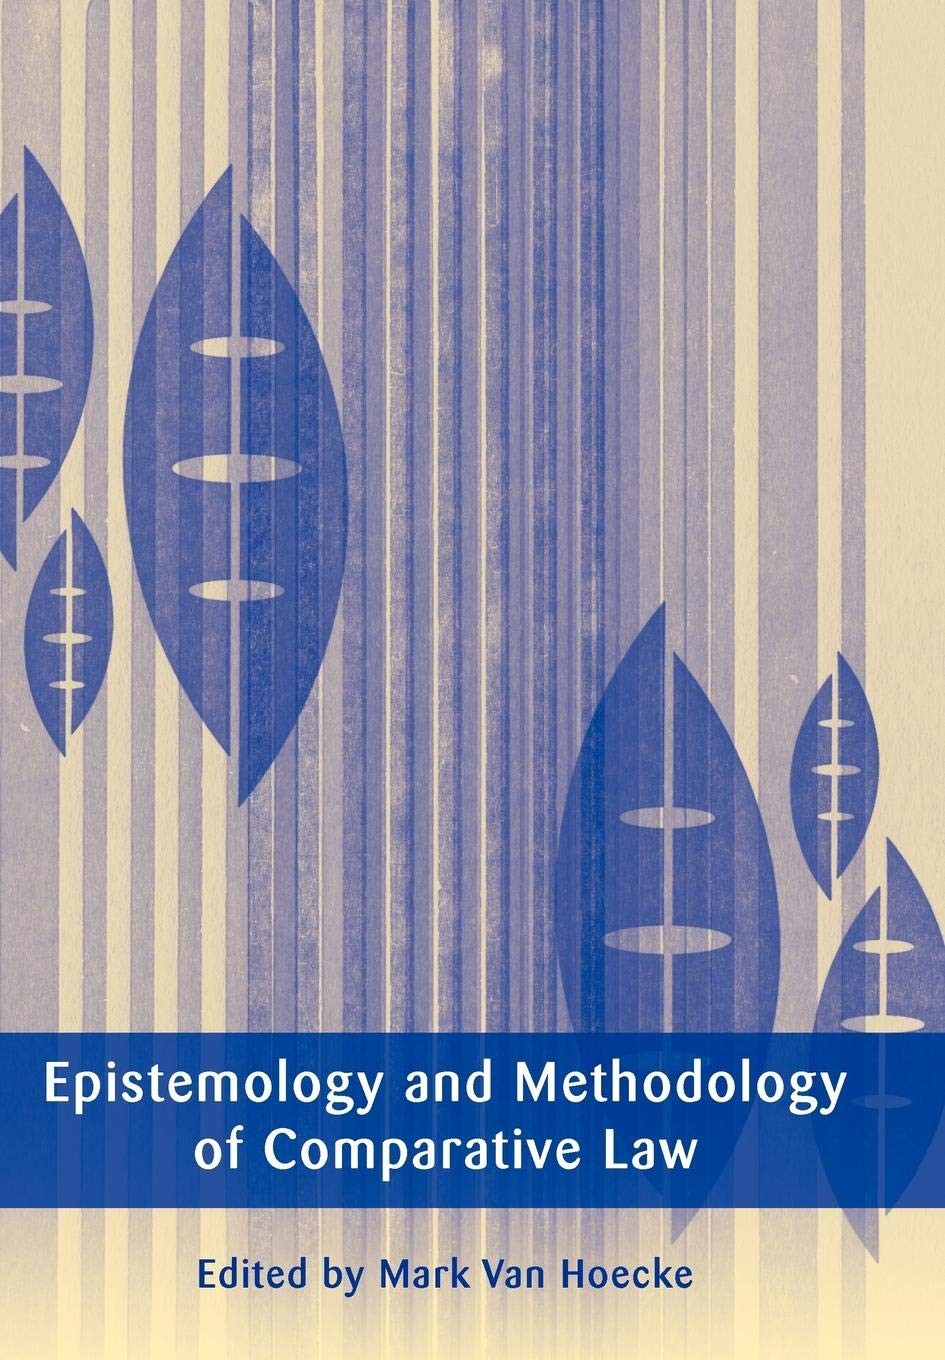 Epistemology and Methodology of Comparitive Law